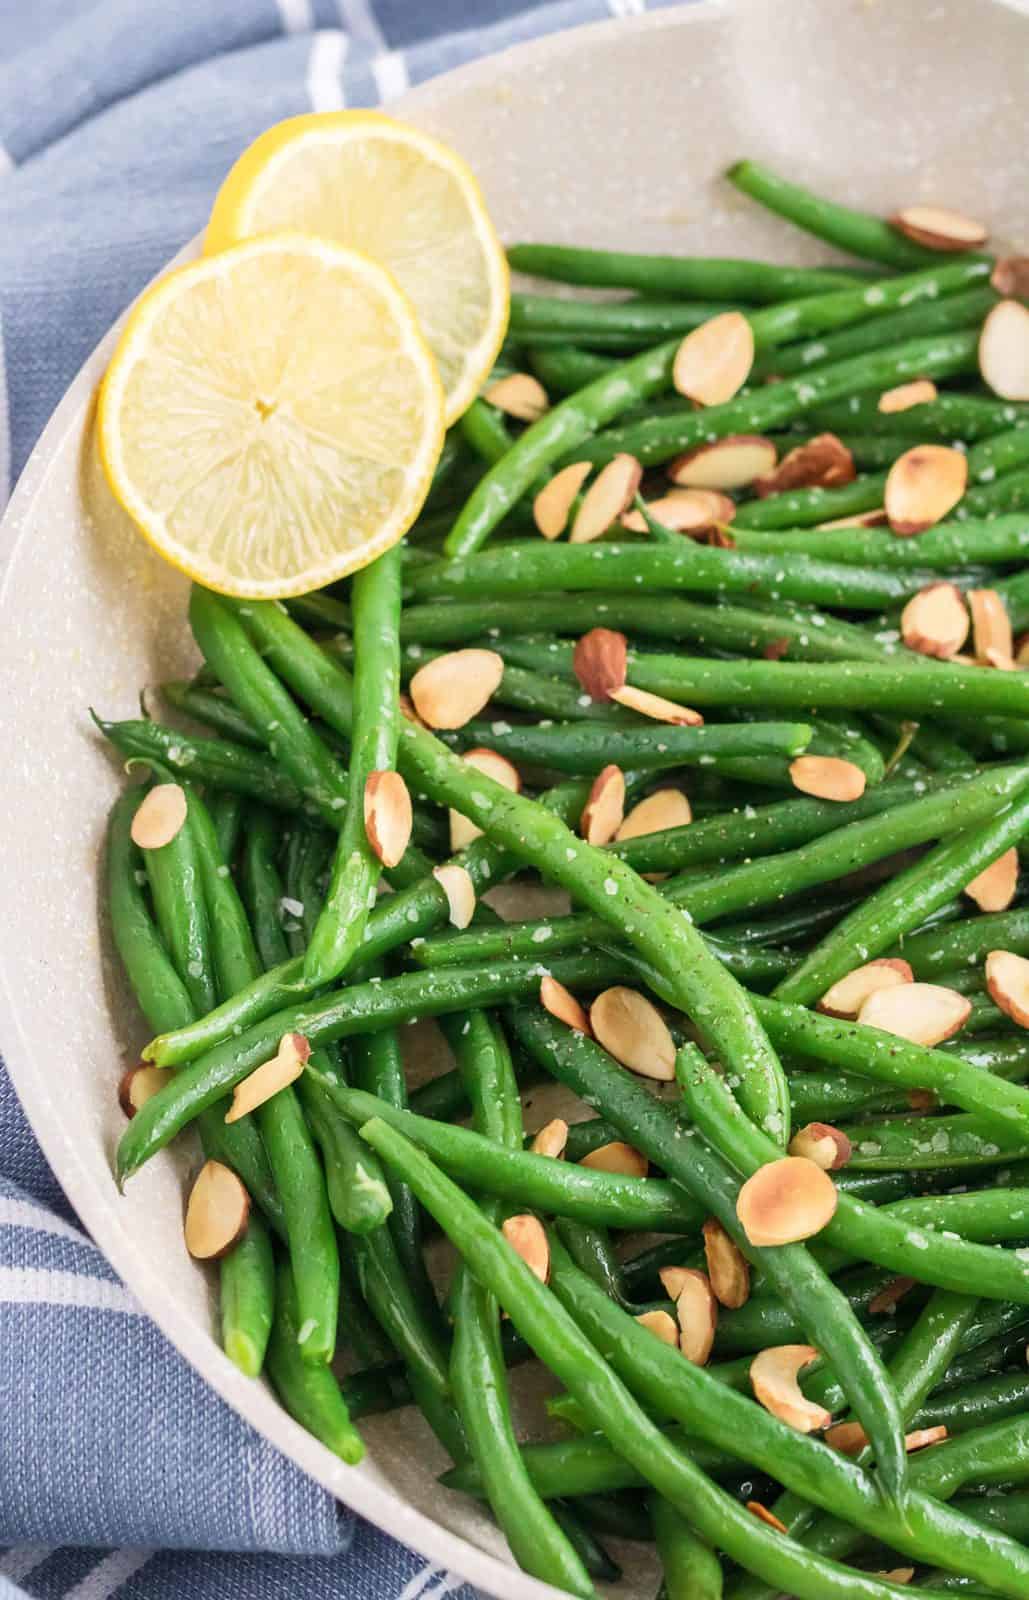 Bowl of Almond Green Beans with lemon slices.